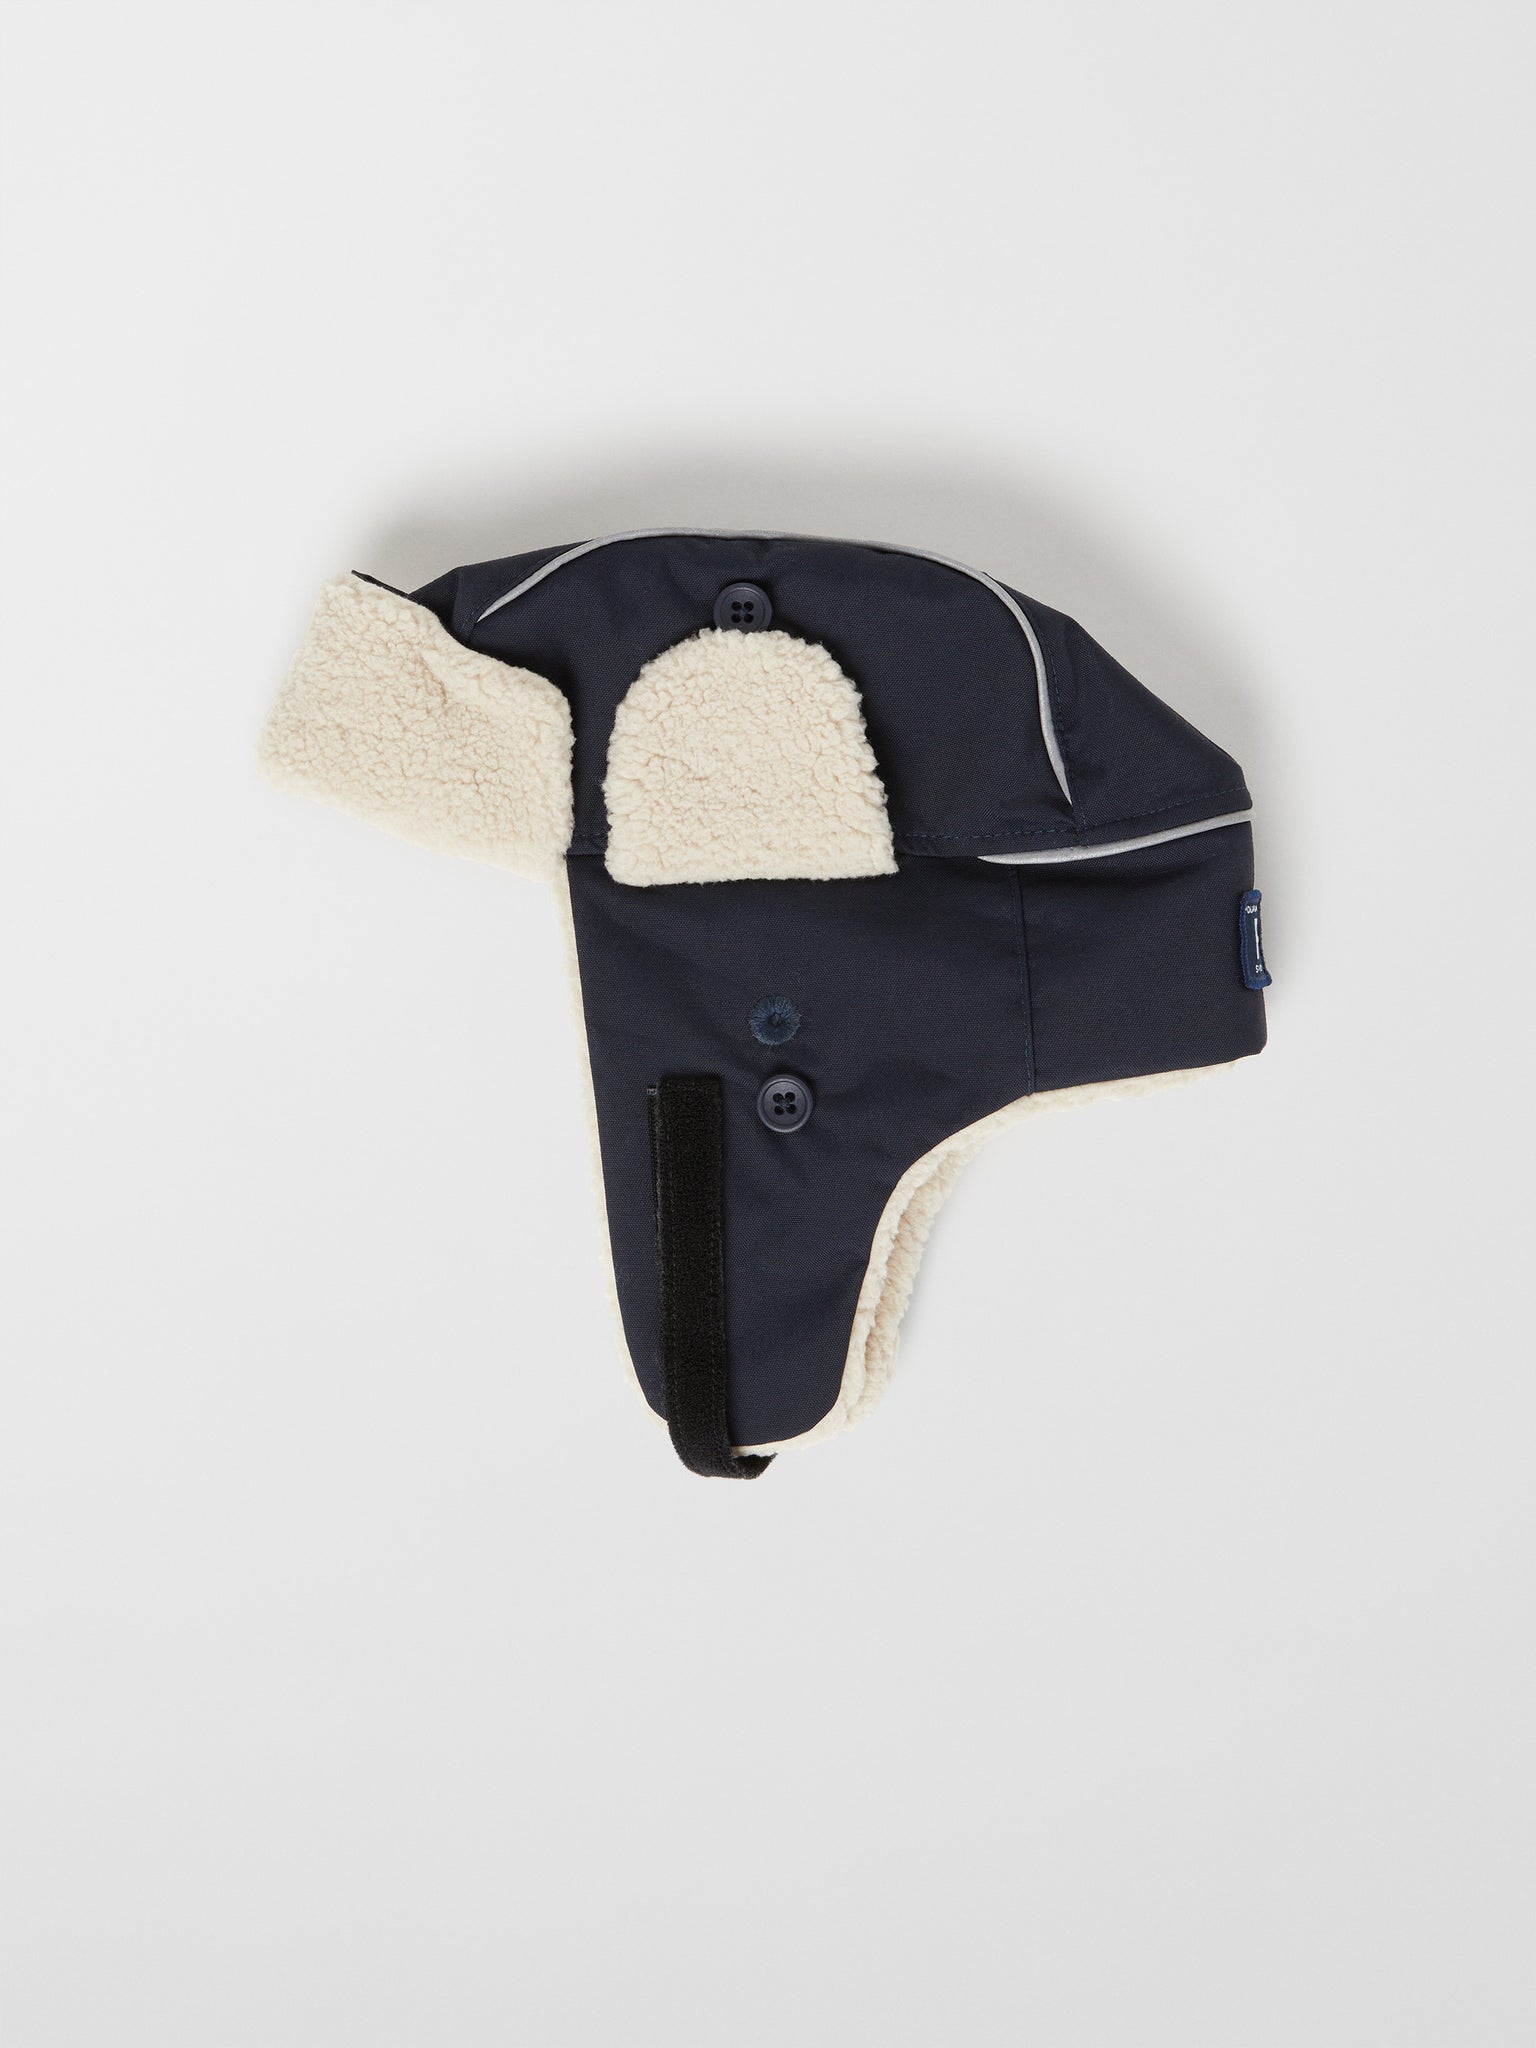 Navy Kids Fur Trim Hat from the Polarn O. Pyret outerwear collection. The best ethical kids outerwear.